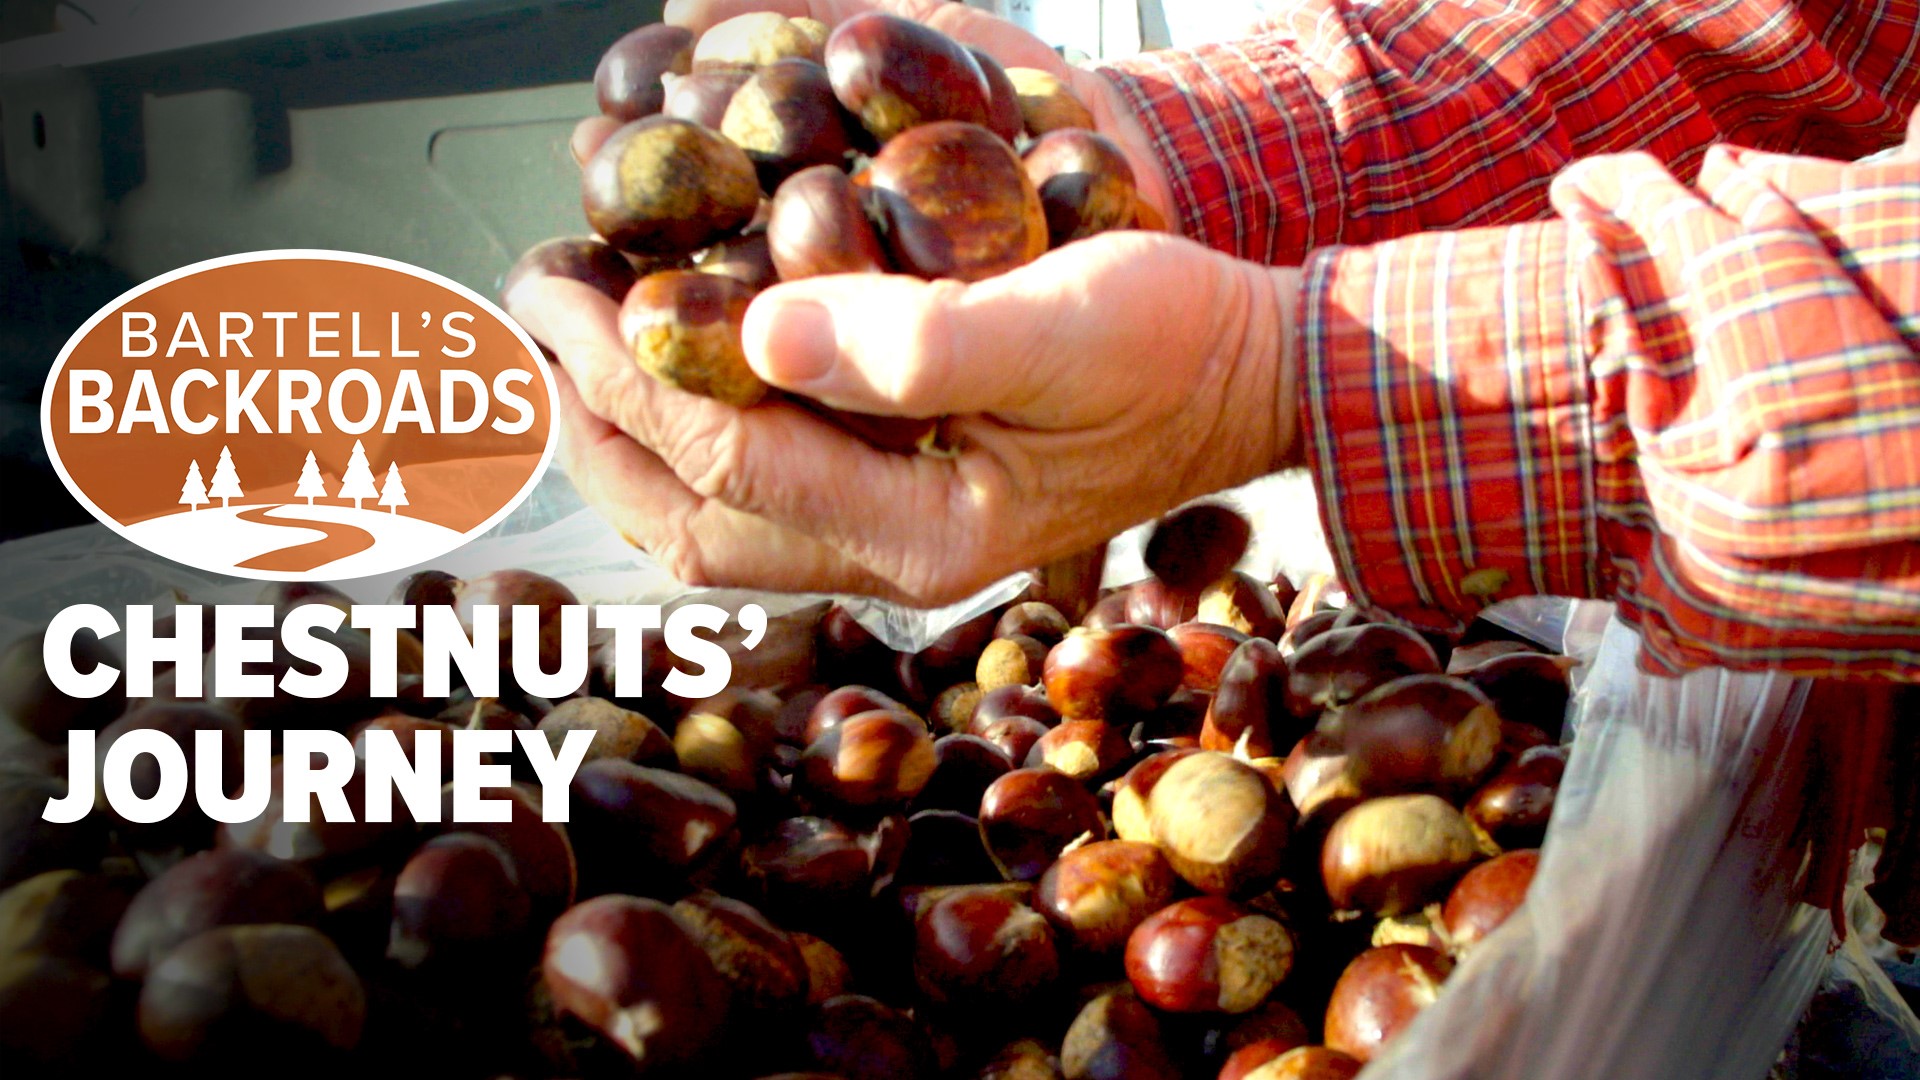 If the idea of roasting chestnuts over an open fire sound good, you could head to Auburn where Tim Boughton grows about 8,000 pounds of chestnuts on his orchard.